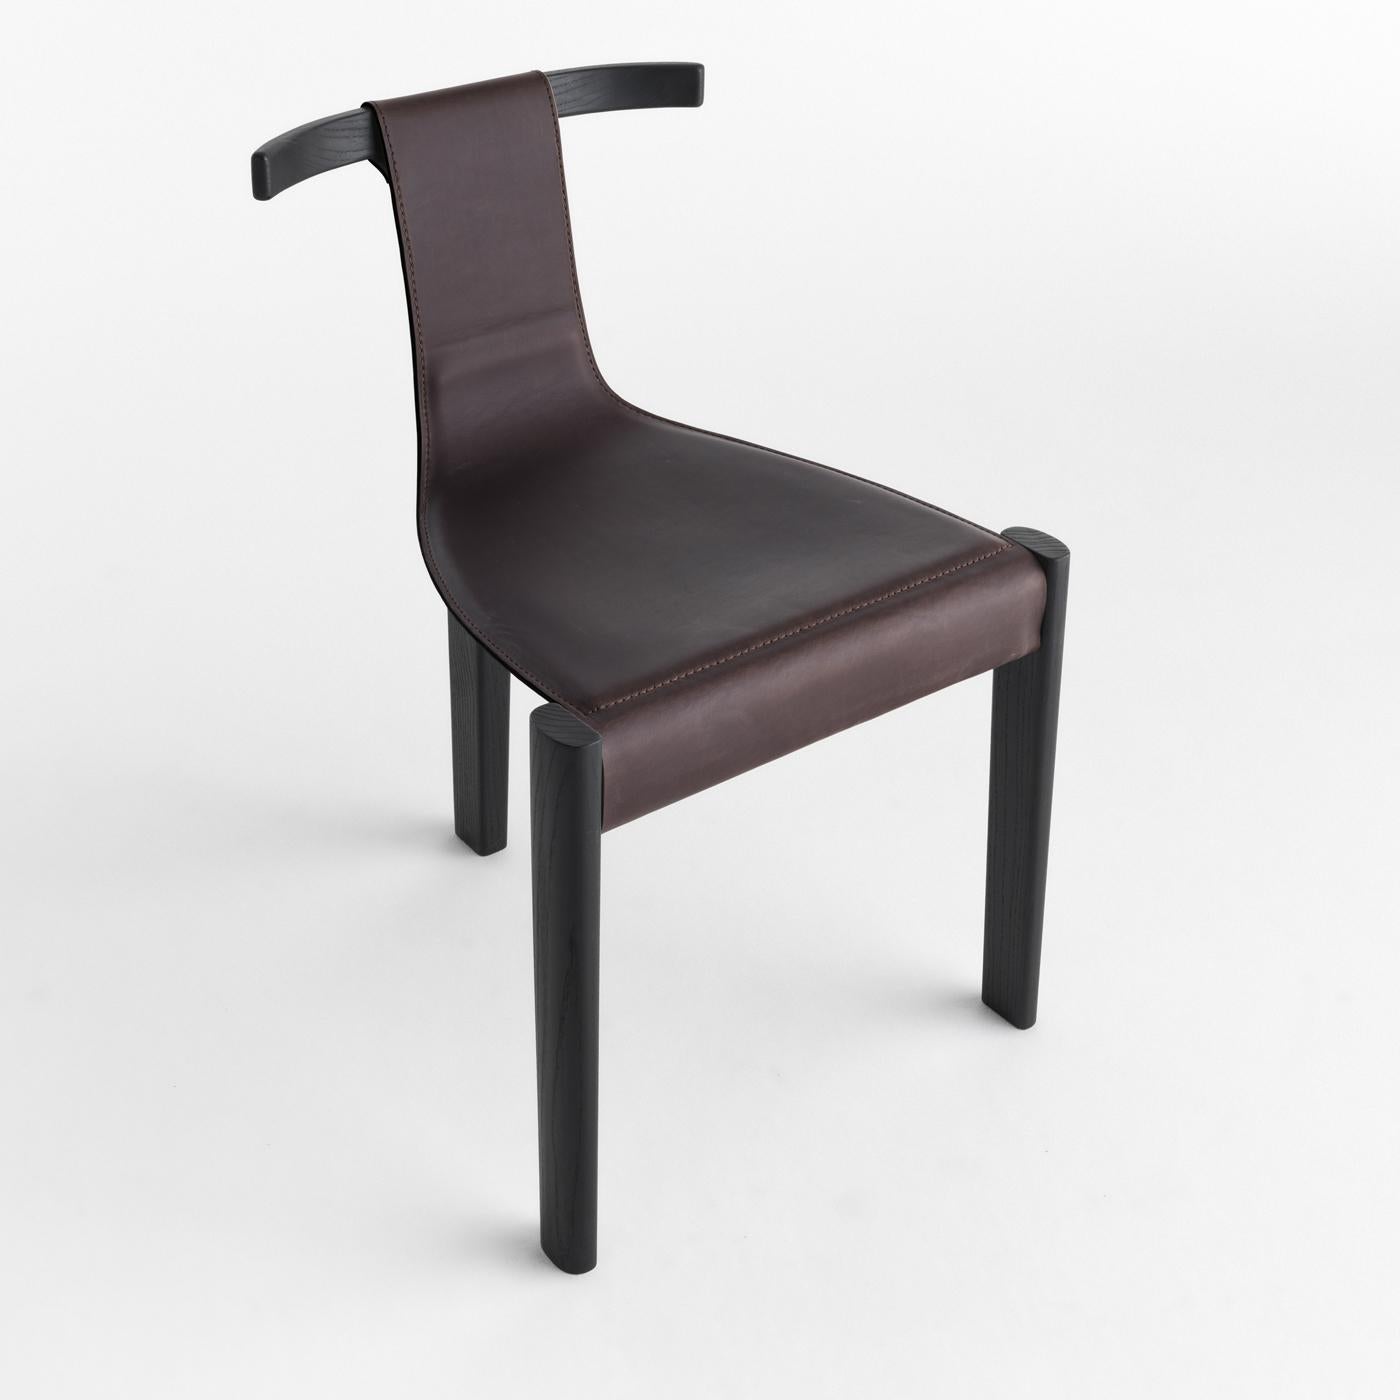 Reminiscent of Picasso’s cubist sculptures and signature style, this three-legged chair designed by Marcello Pozzi is a lightweight and refined piece of functional decor. It is composed of solid black ash supporting frame and backrest, the latter